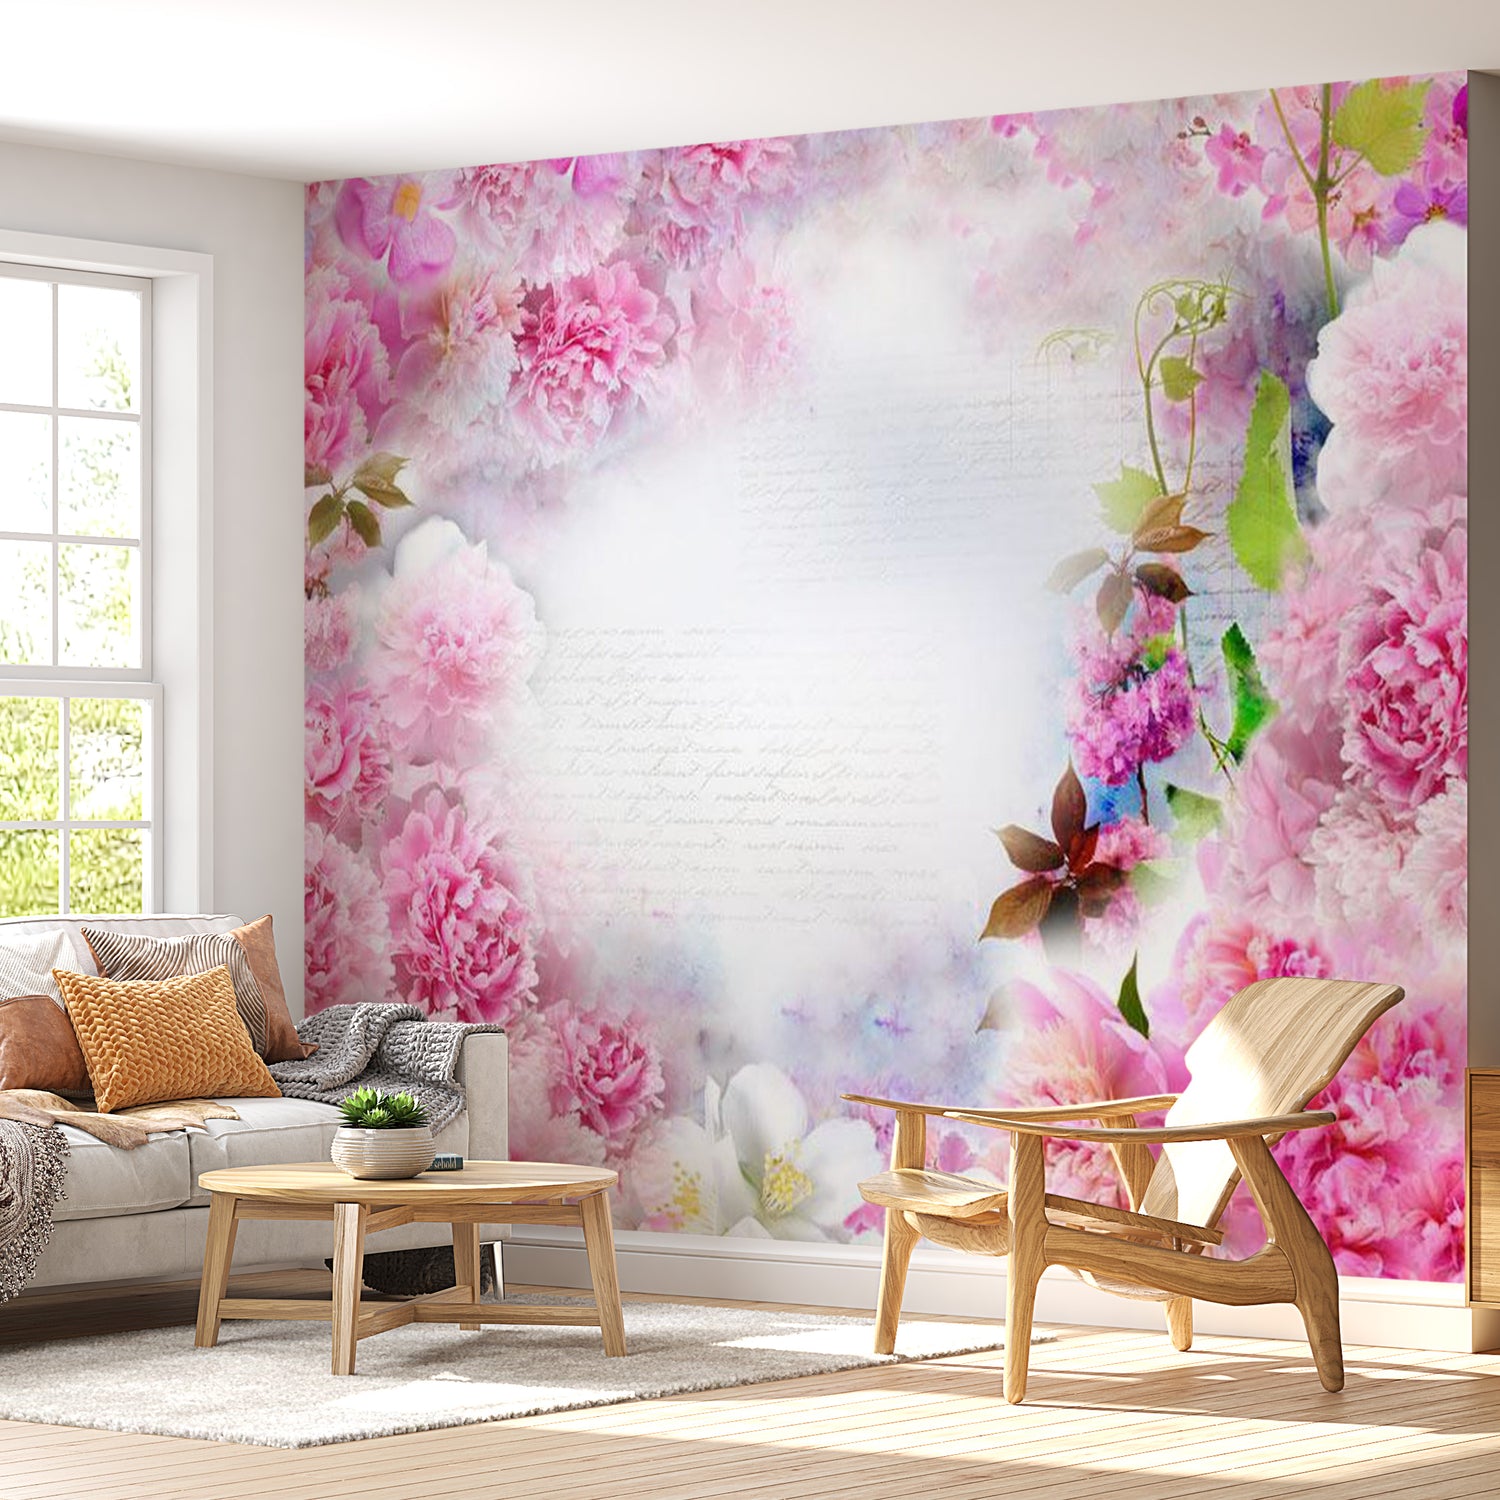 Peel & Stick Floral Wall Mural - Smell Of Cloves - Removable Wall Decals